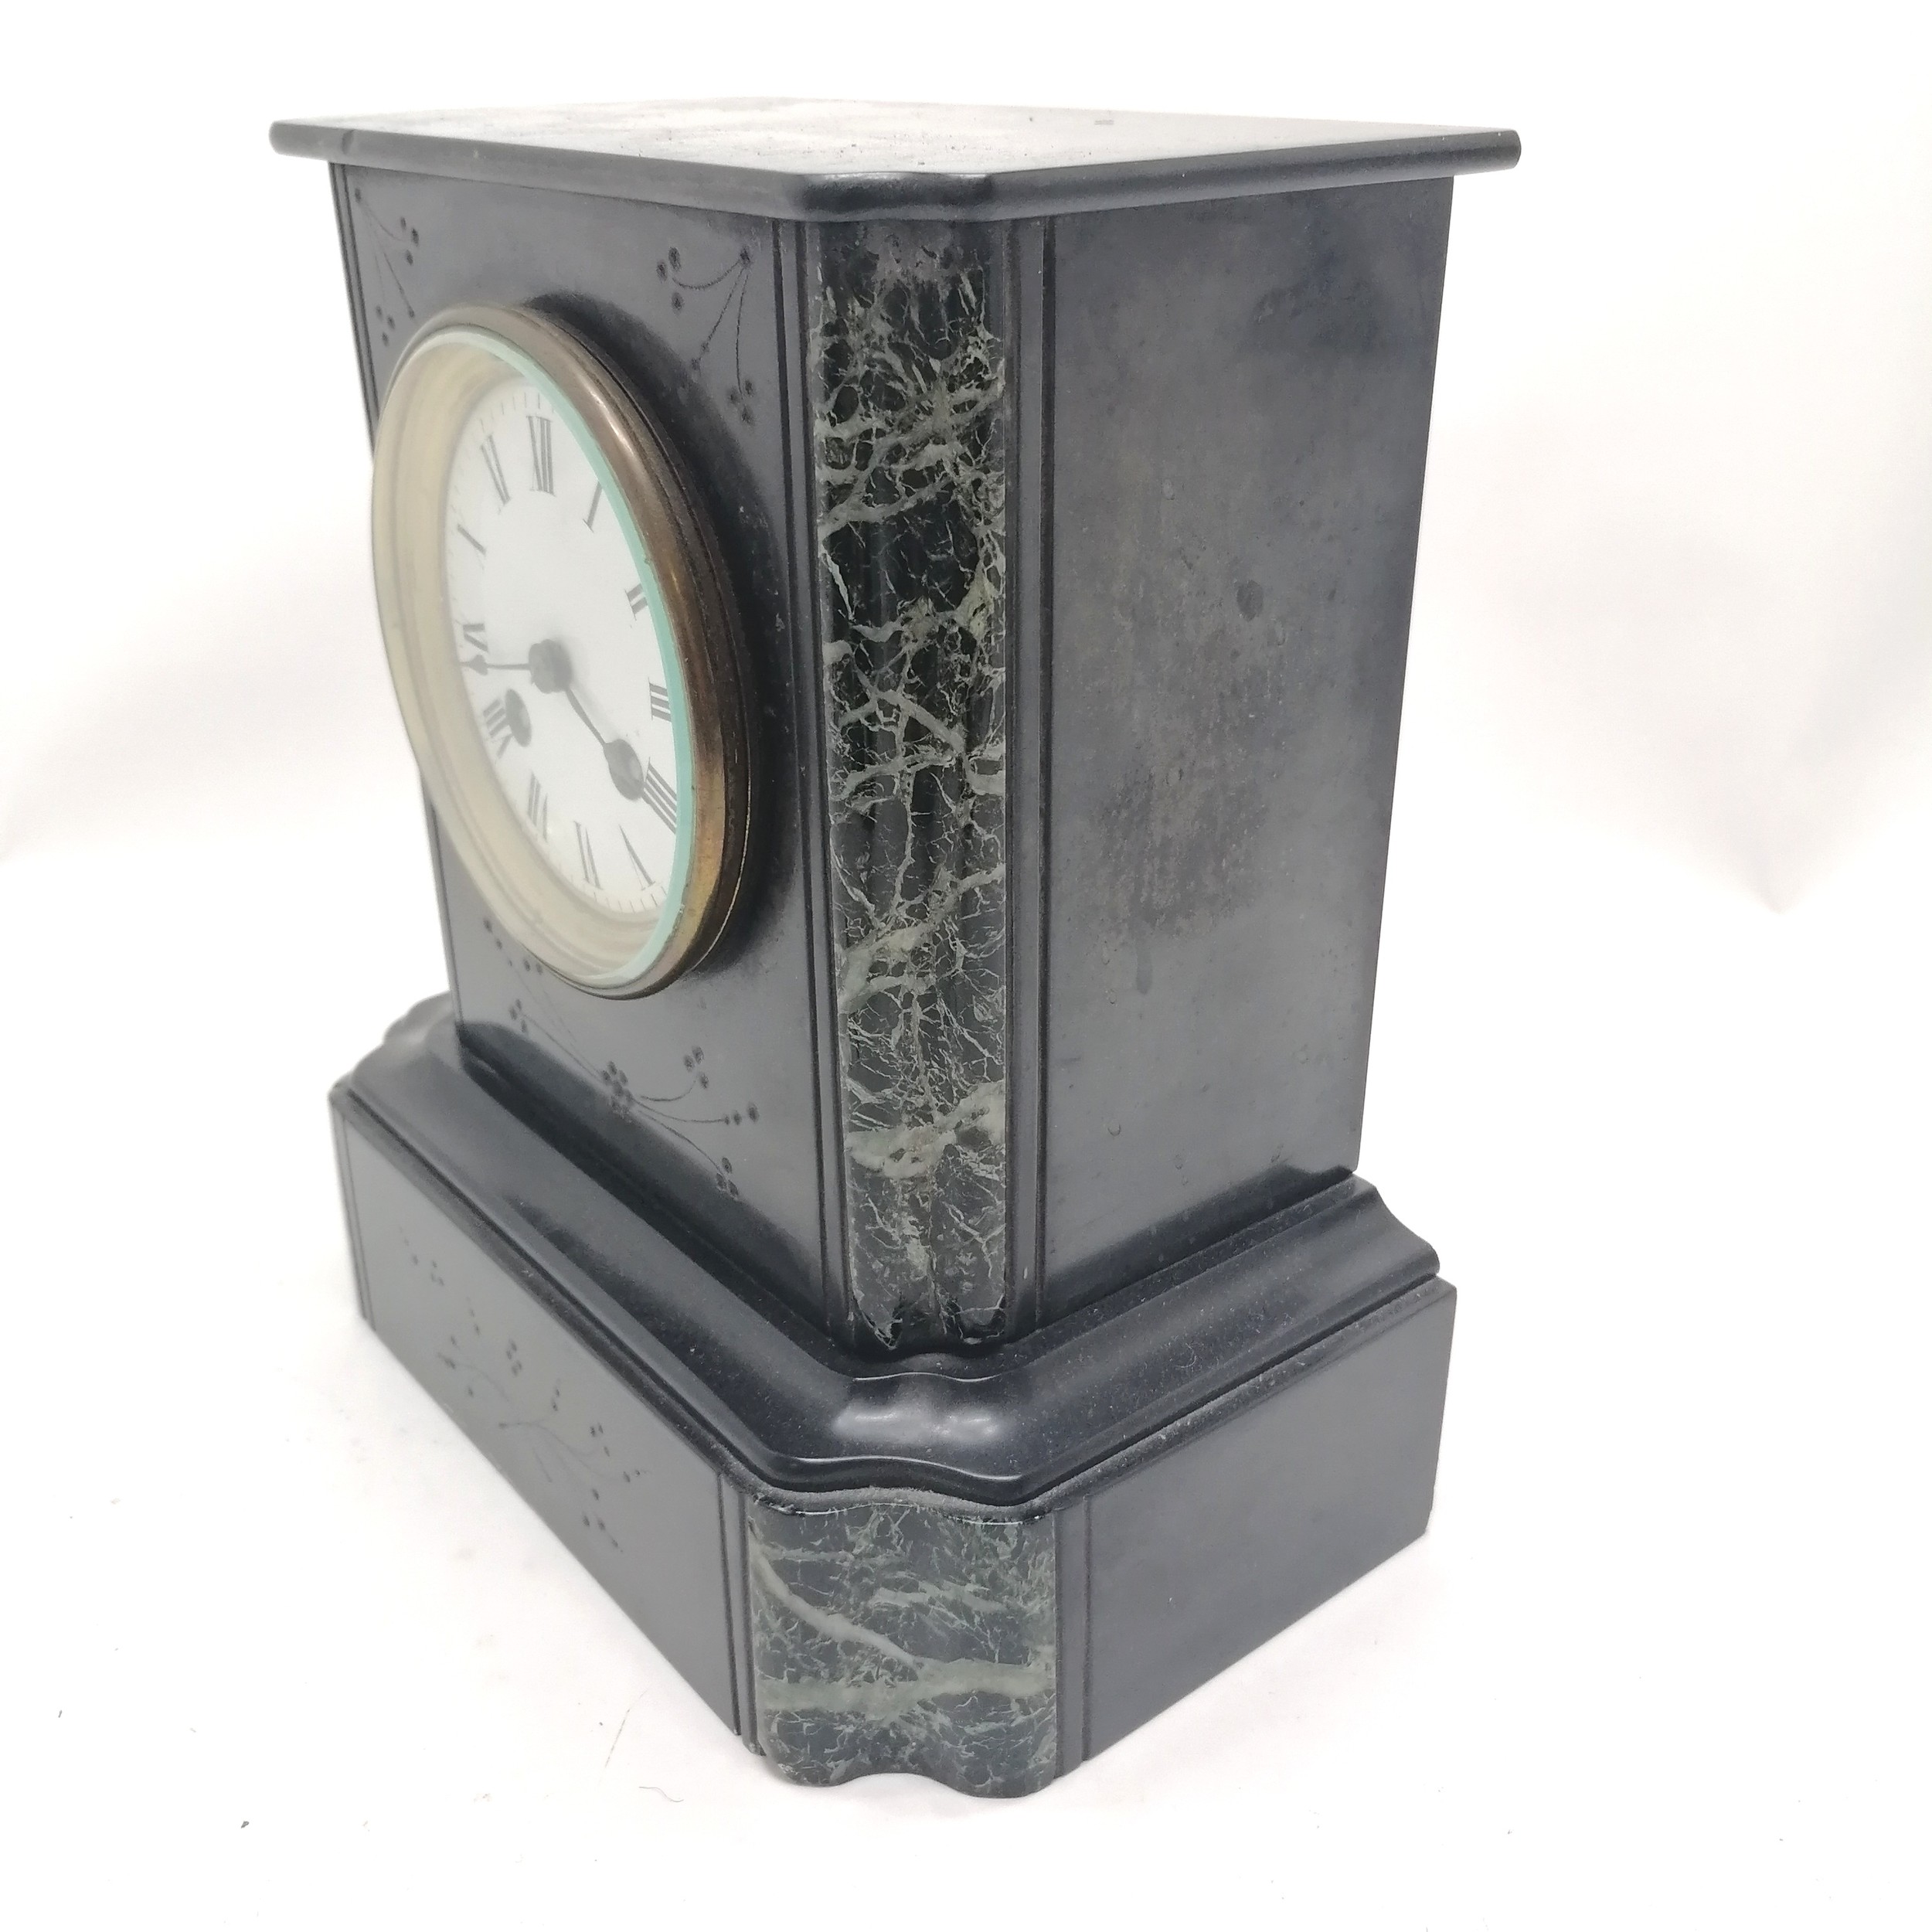 Antique slate and marble mantle clock with bell strike movement 24cm high x 22cm x 13cm with key and - Image 3 of 3